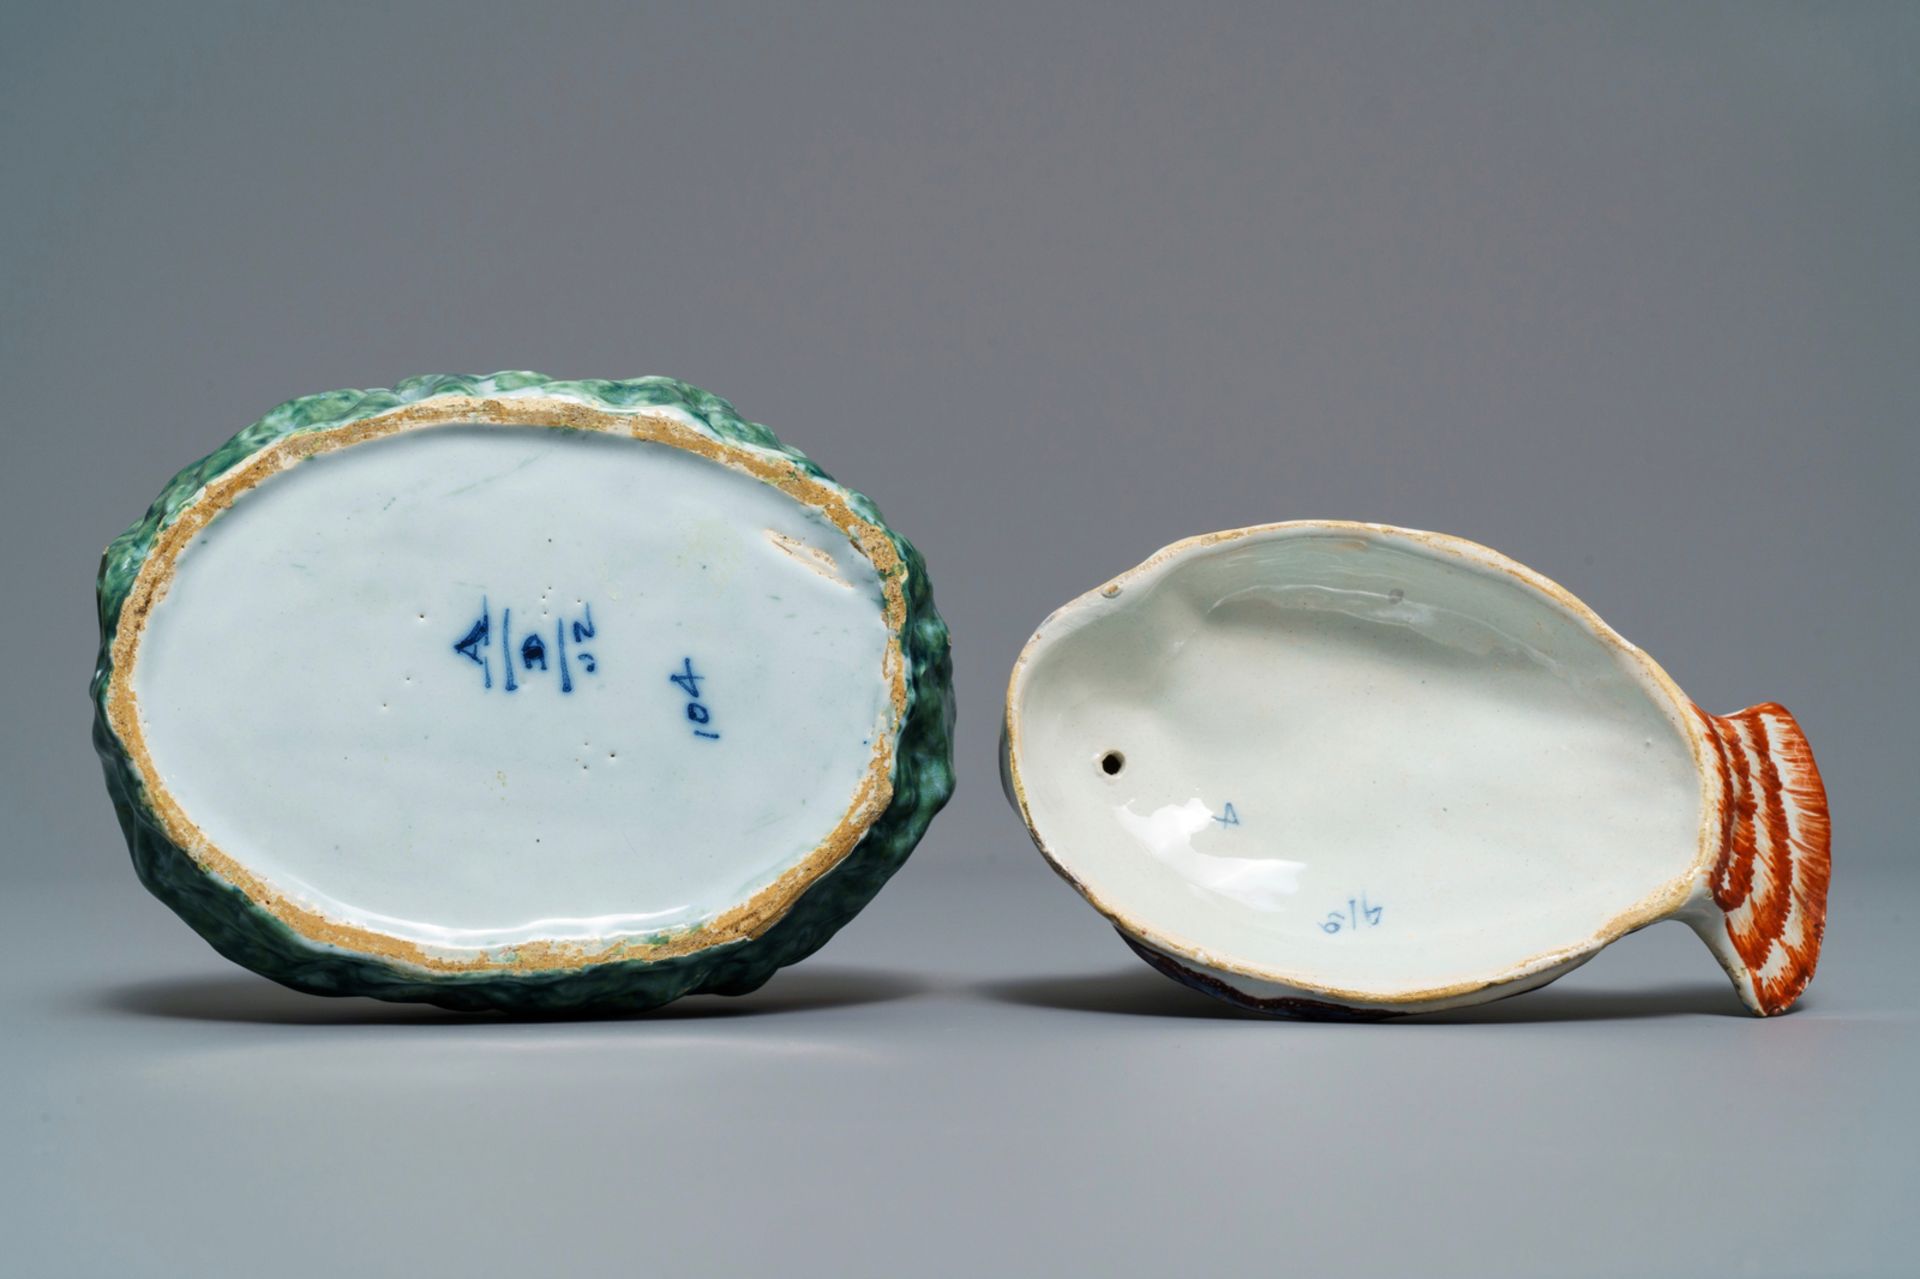 A polychrome Dutch Delft 'plover' butter tub and cover, 18th C. - Image 7 of 7